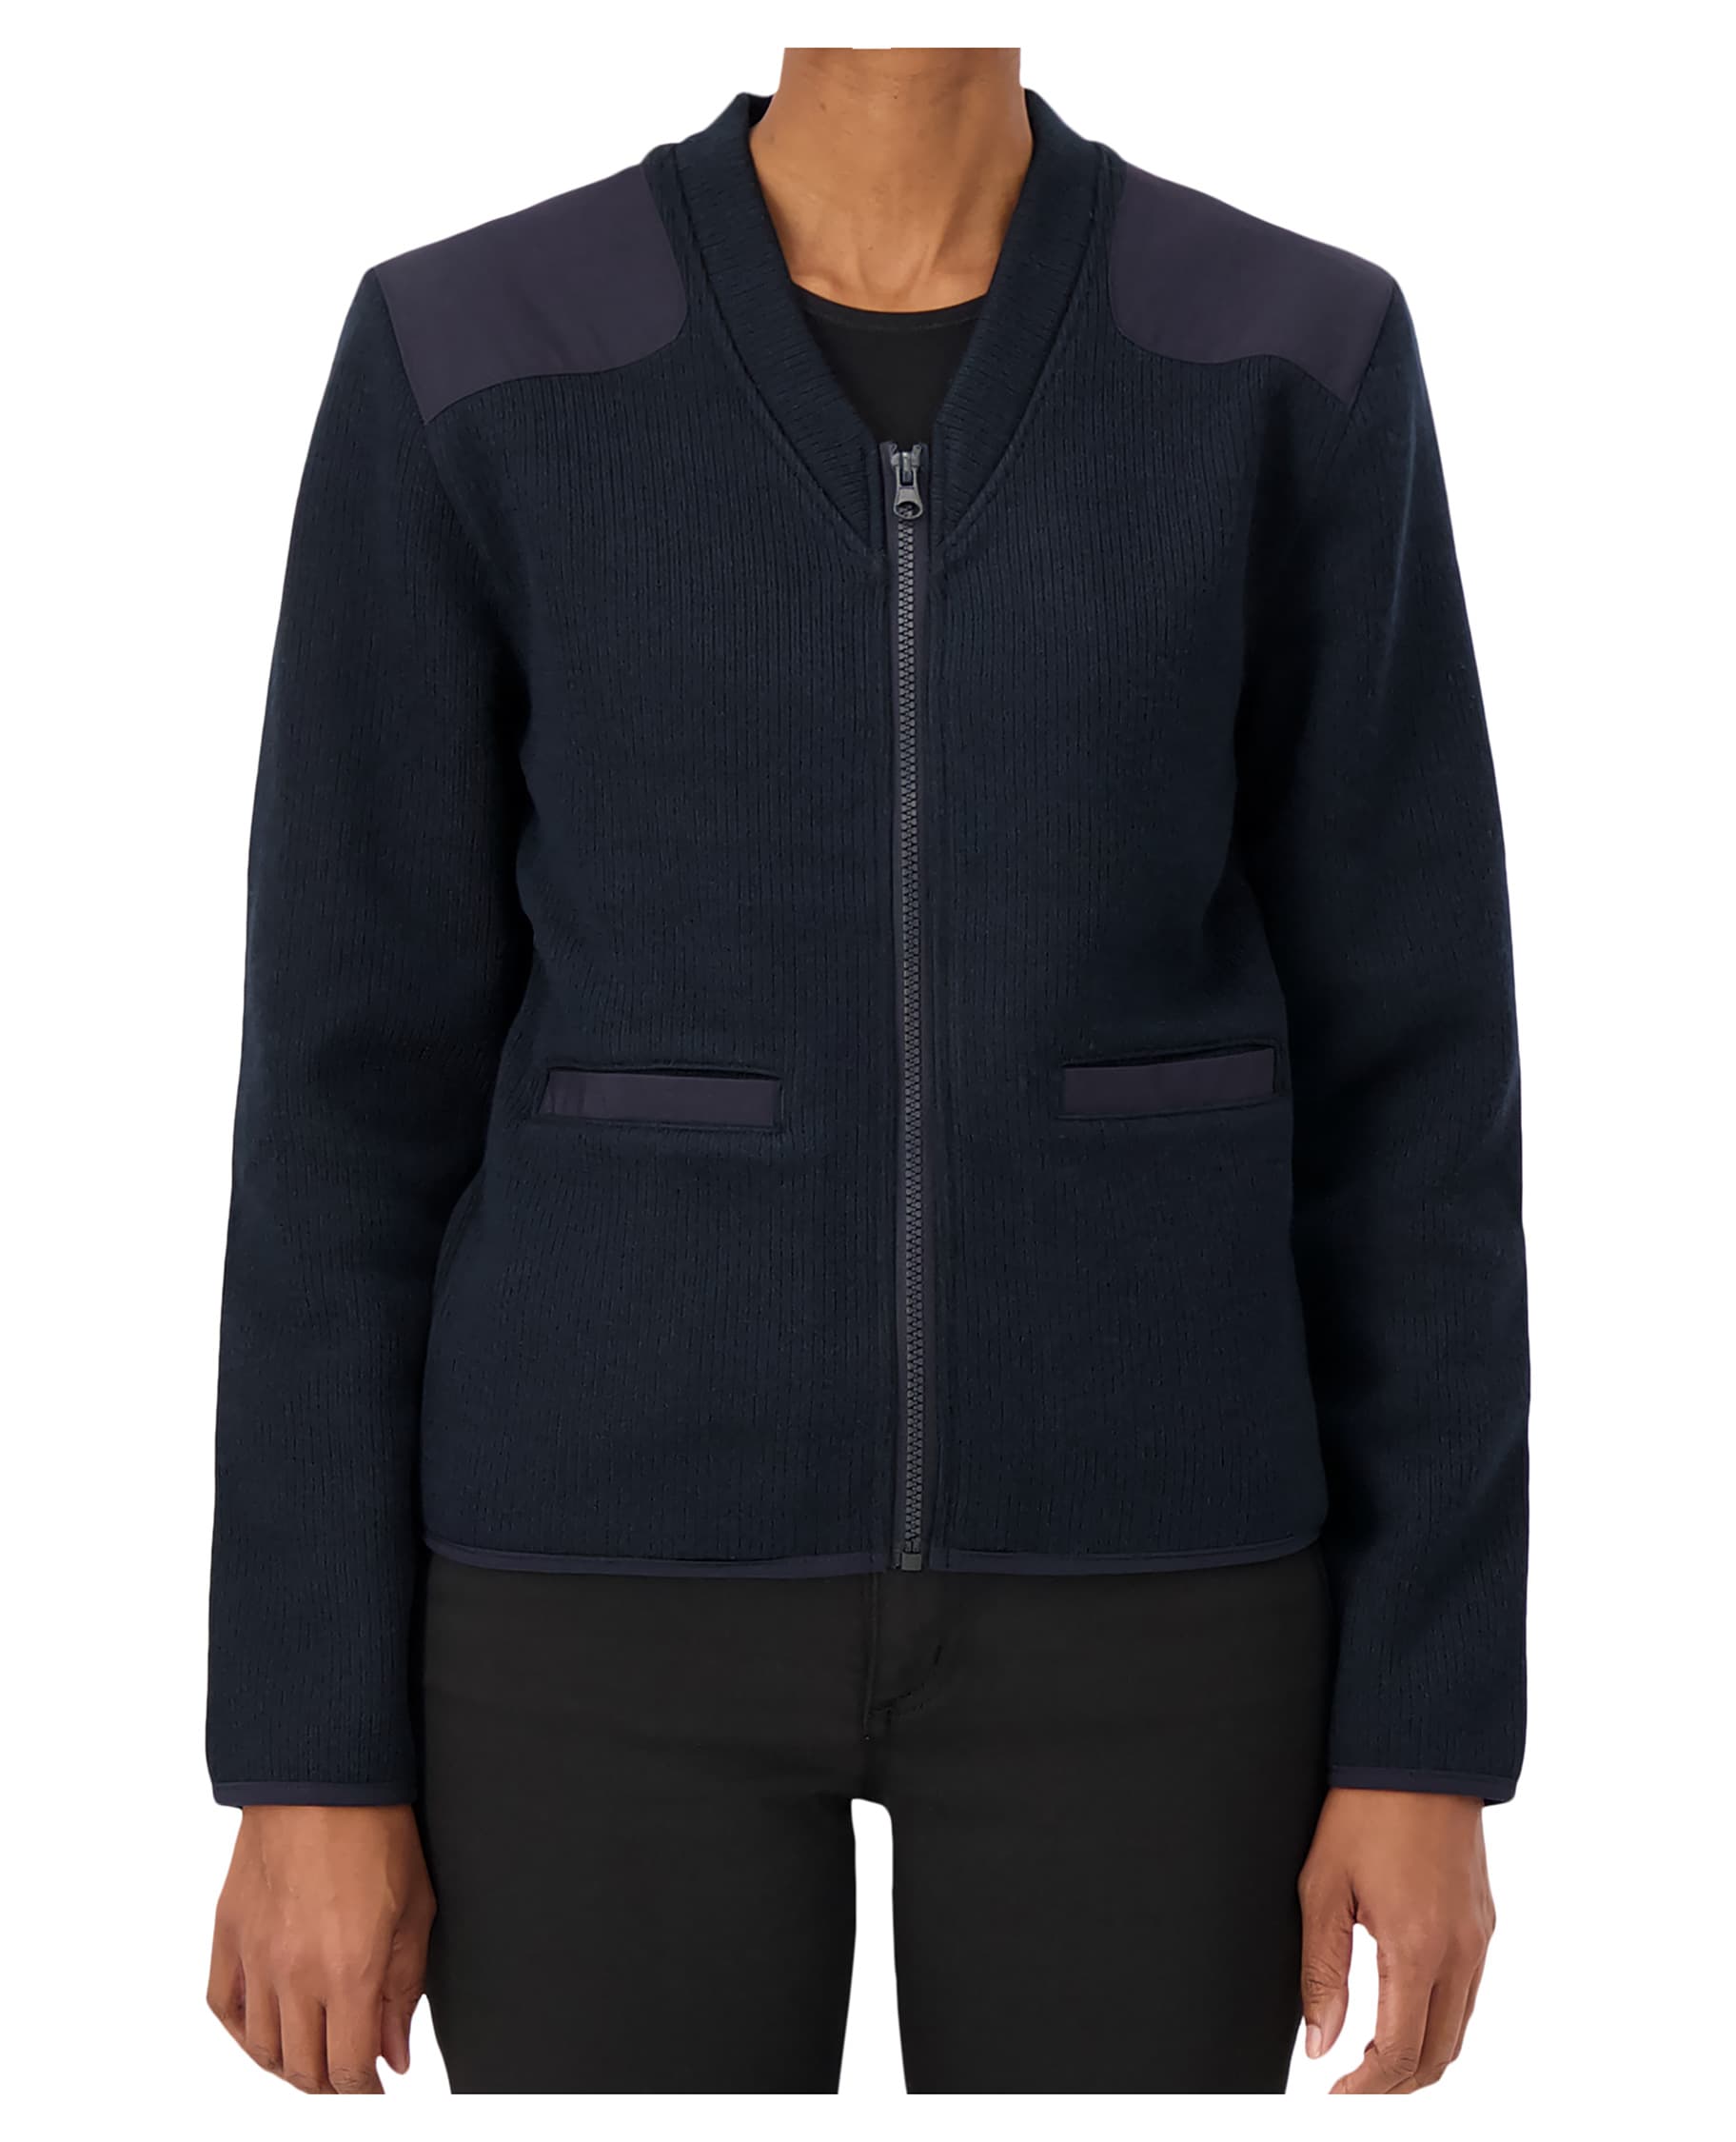 navy v-neck zip up sweater with pockets and shoulder and elbow patches